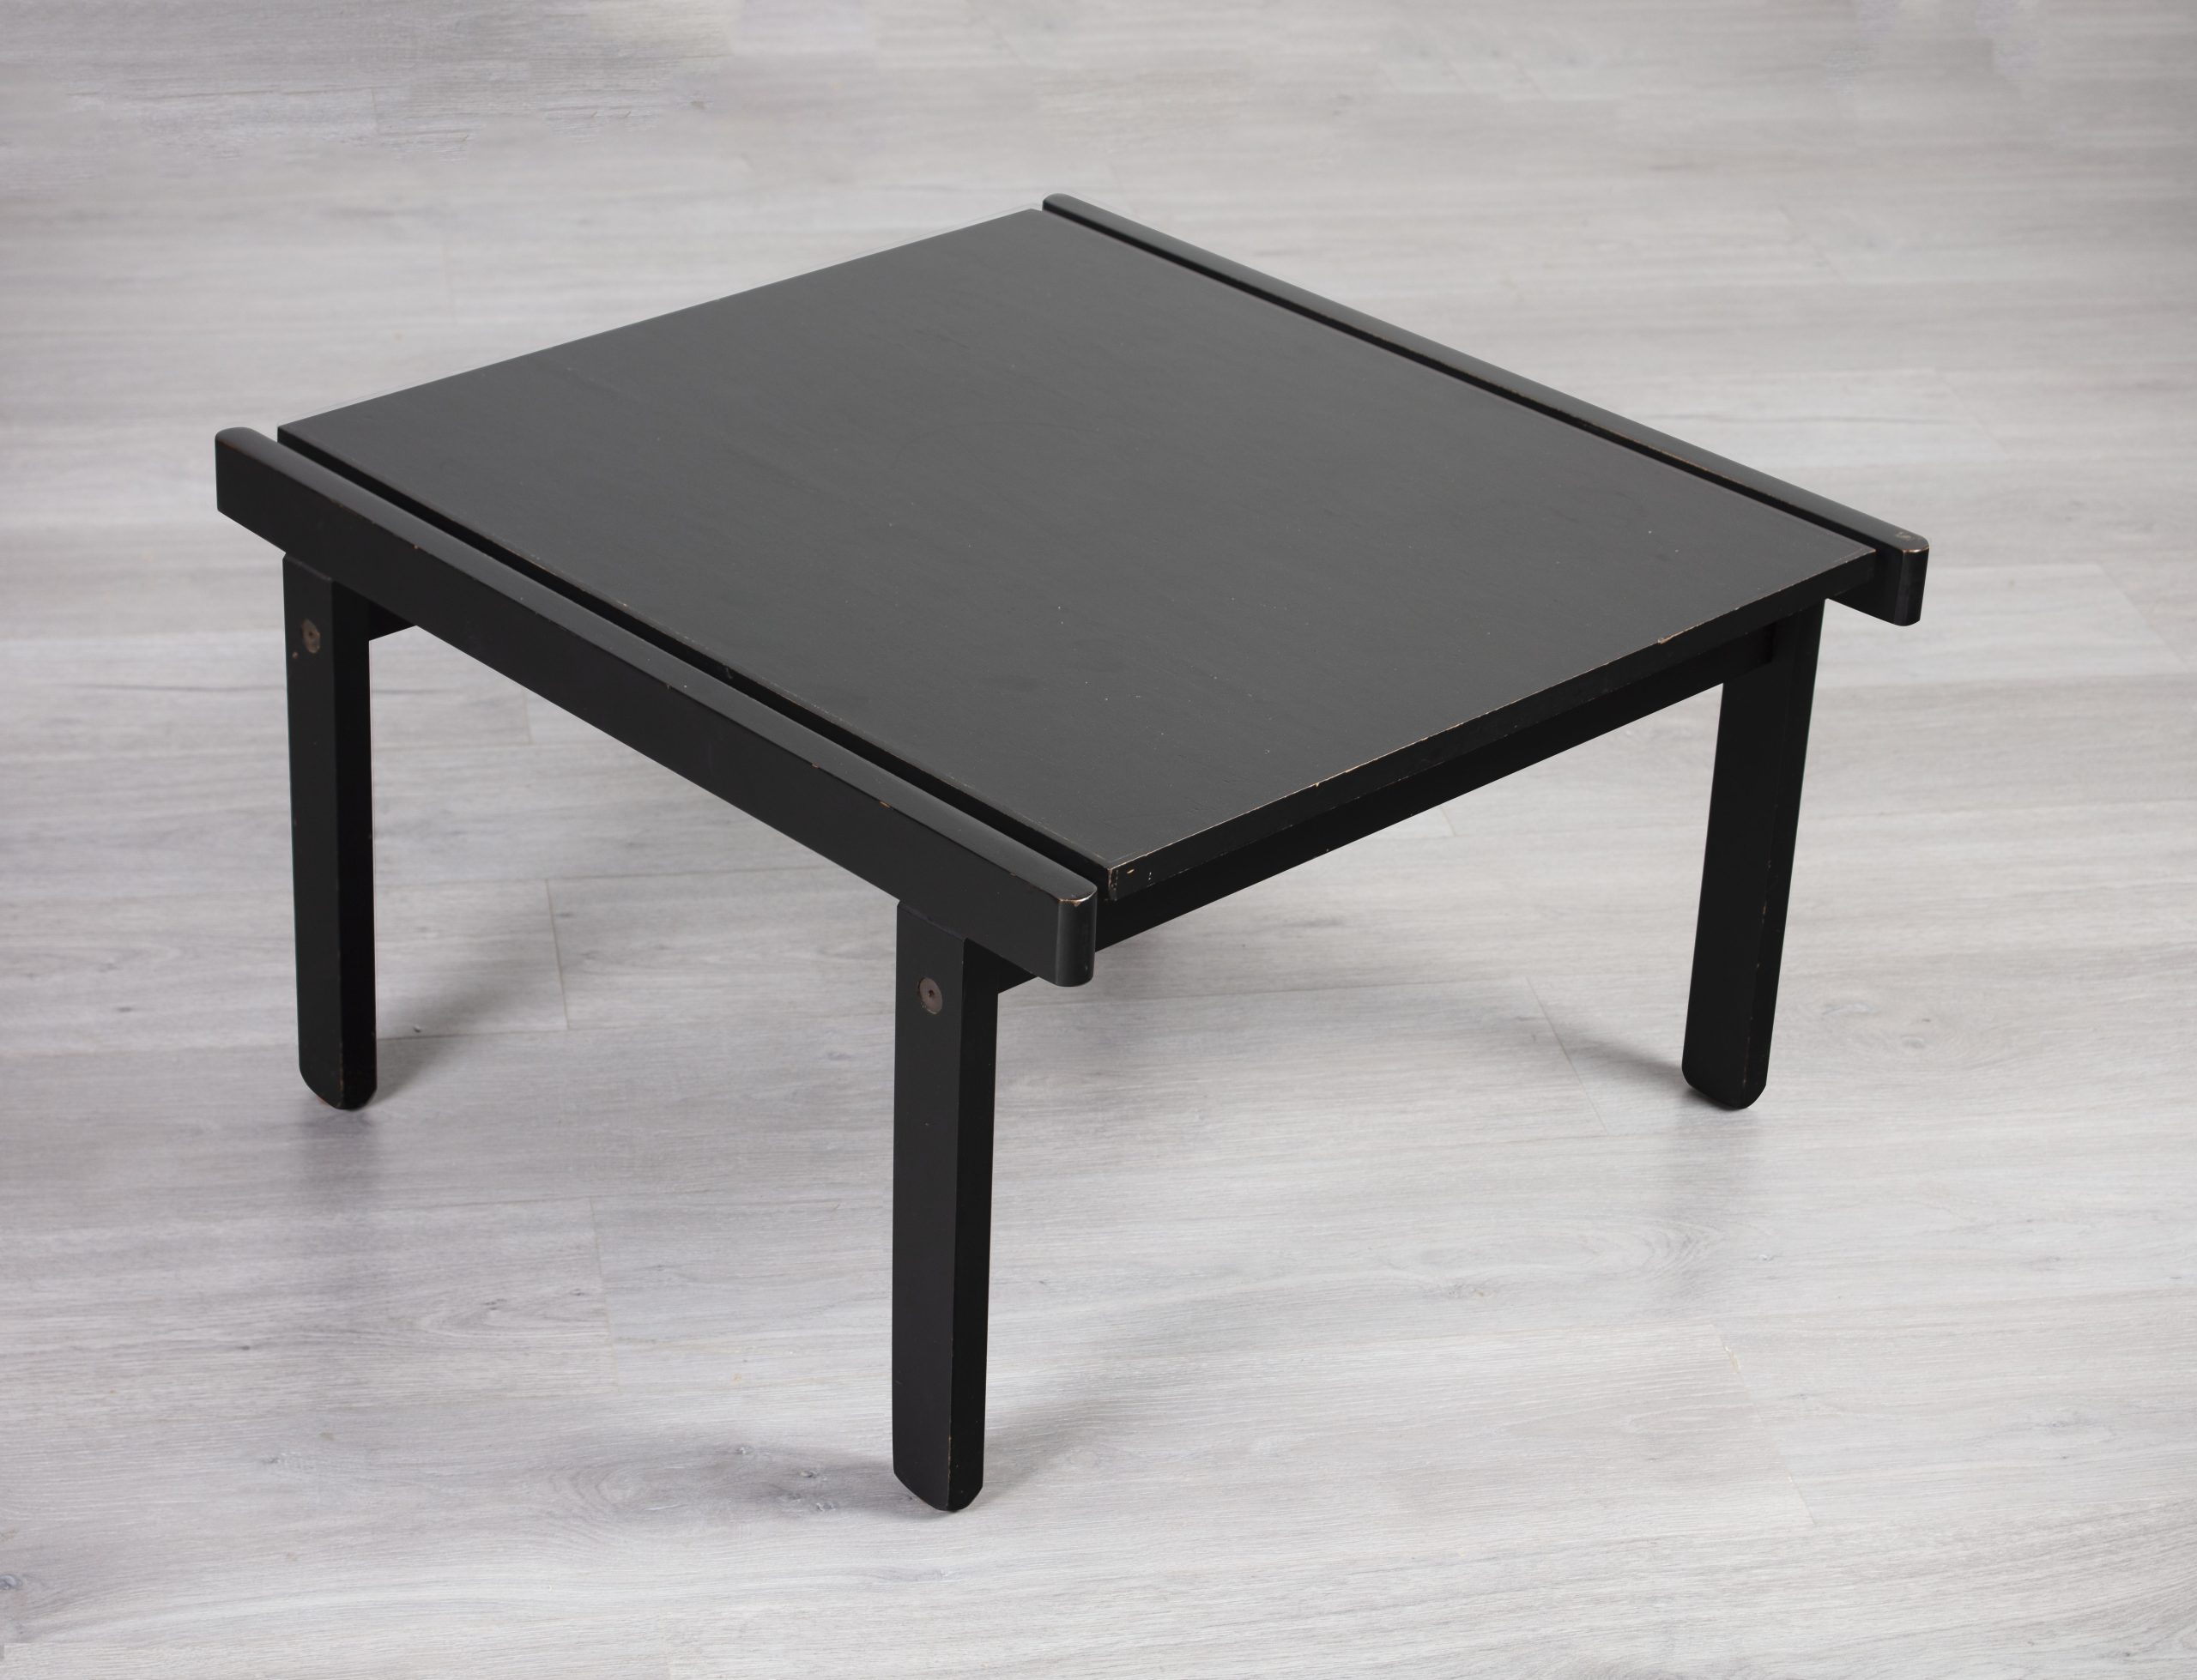 Enquiring about Norwegian 1960's Coffee Table by Torbjørn Afdal